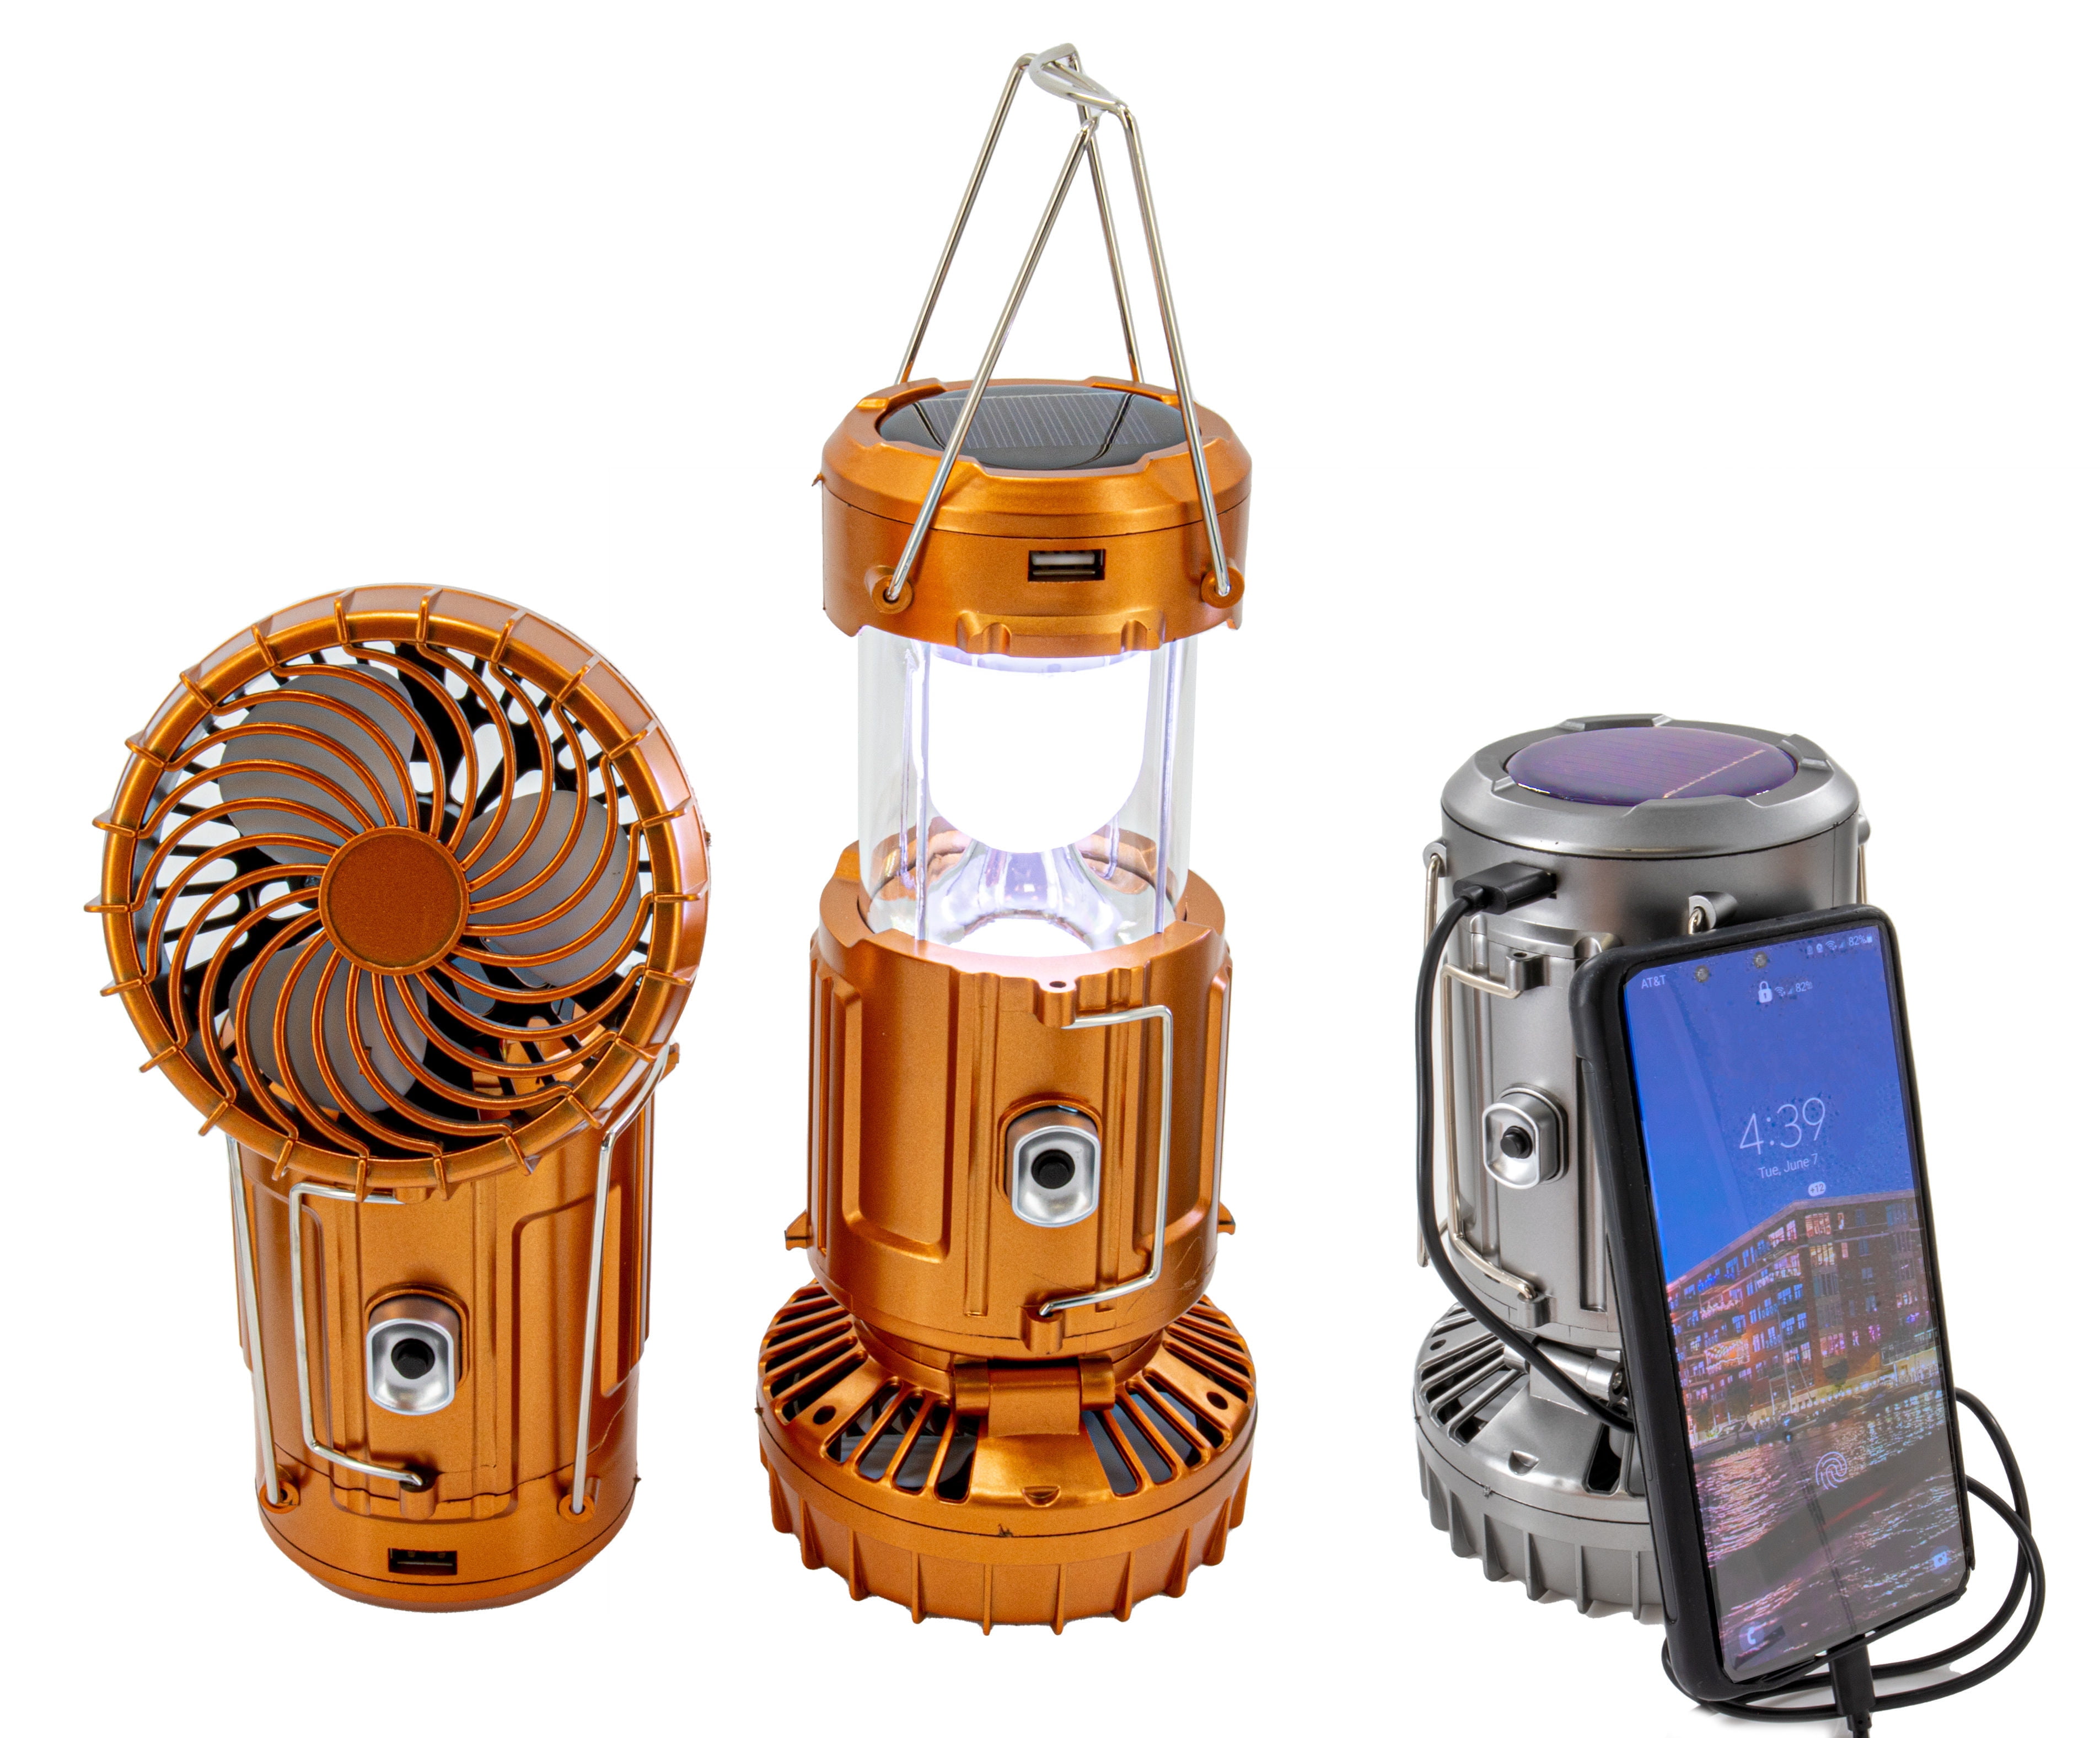 Hot Sale Portable Solar Camping Lantern with Phone Charger 4500mAh